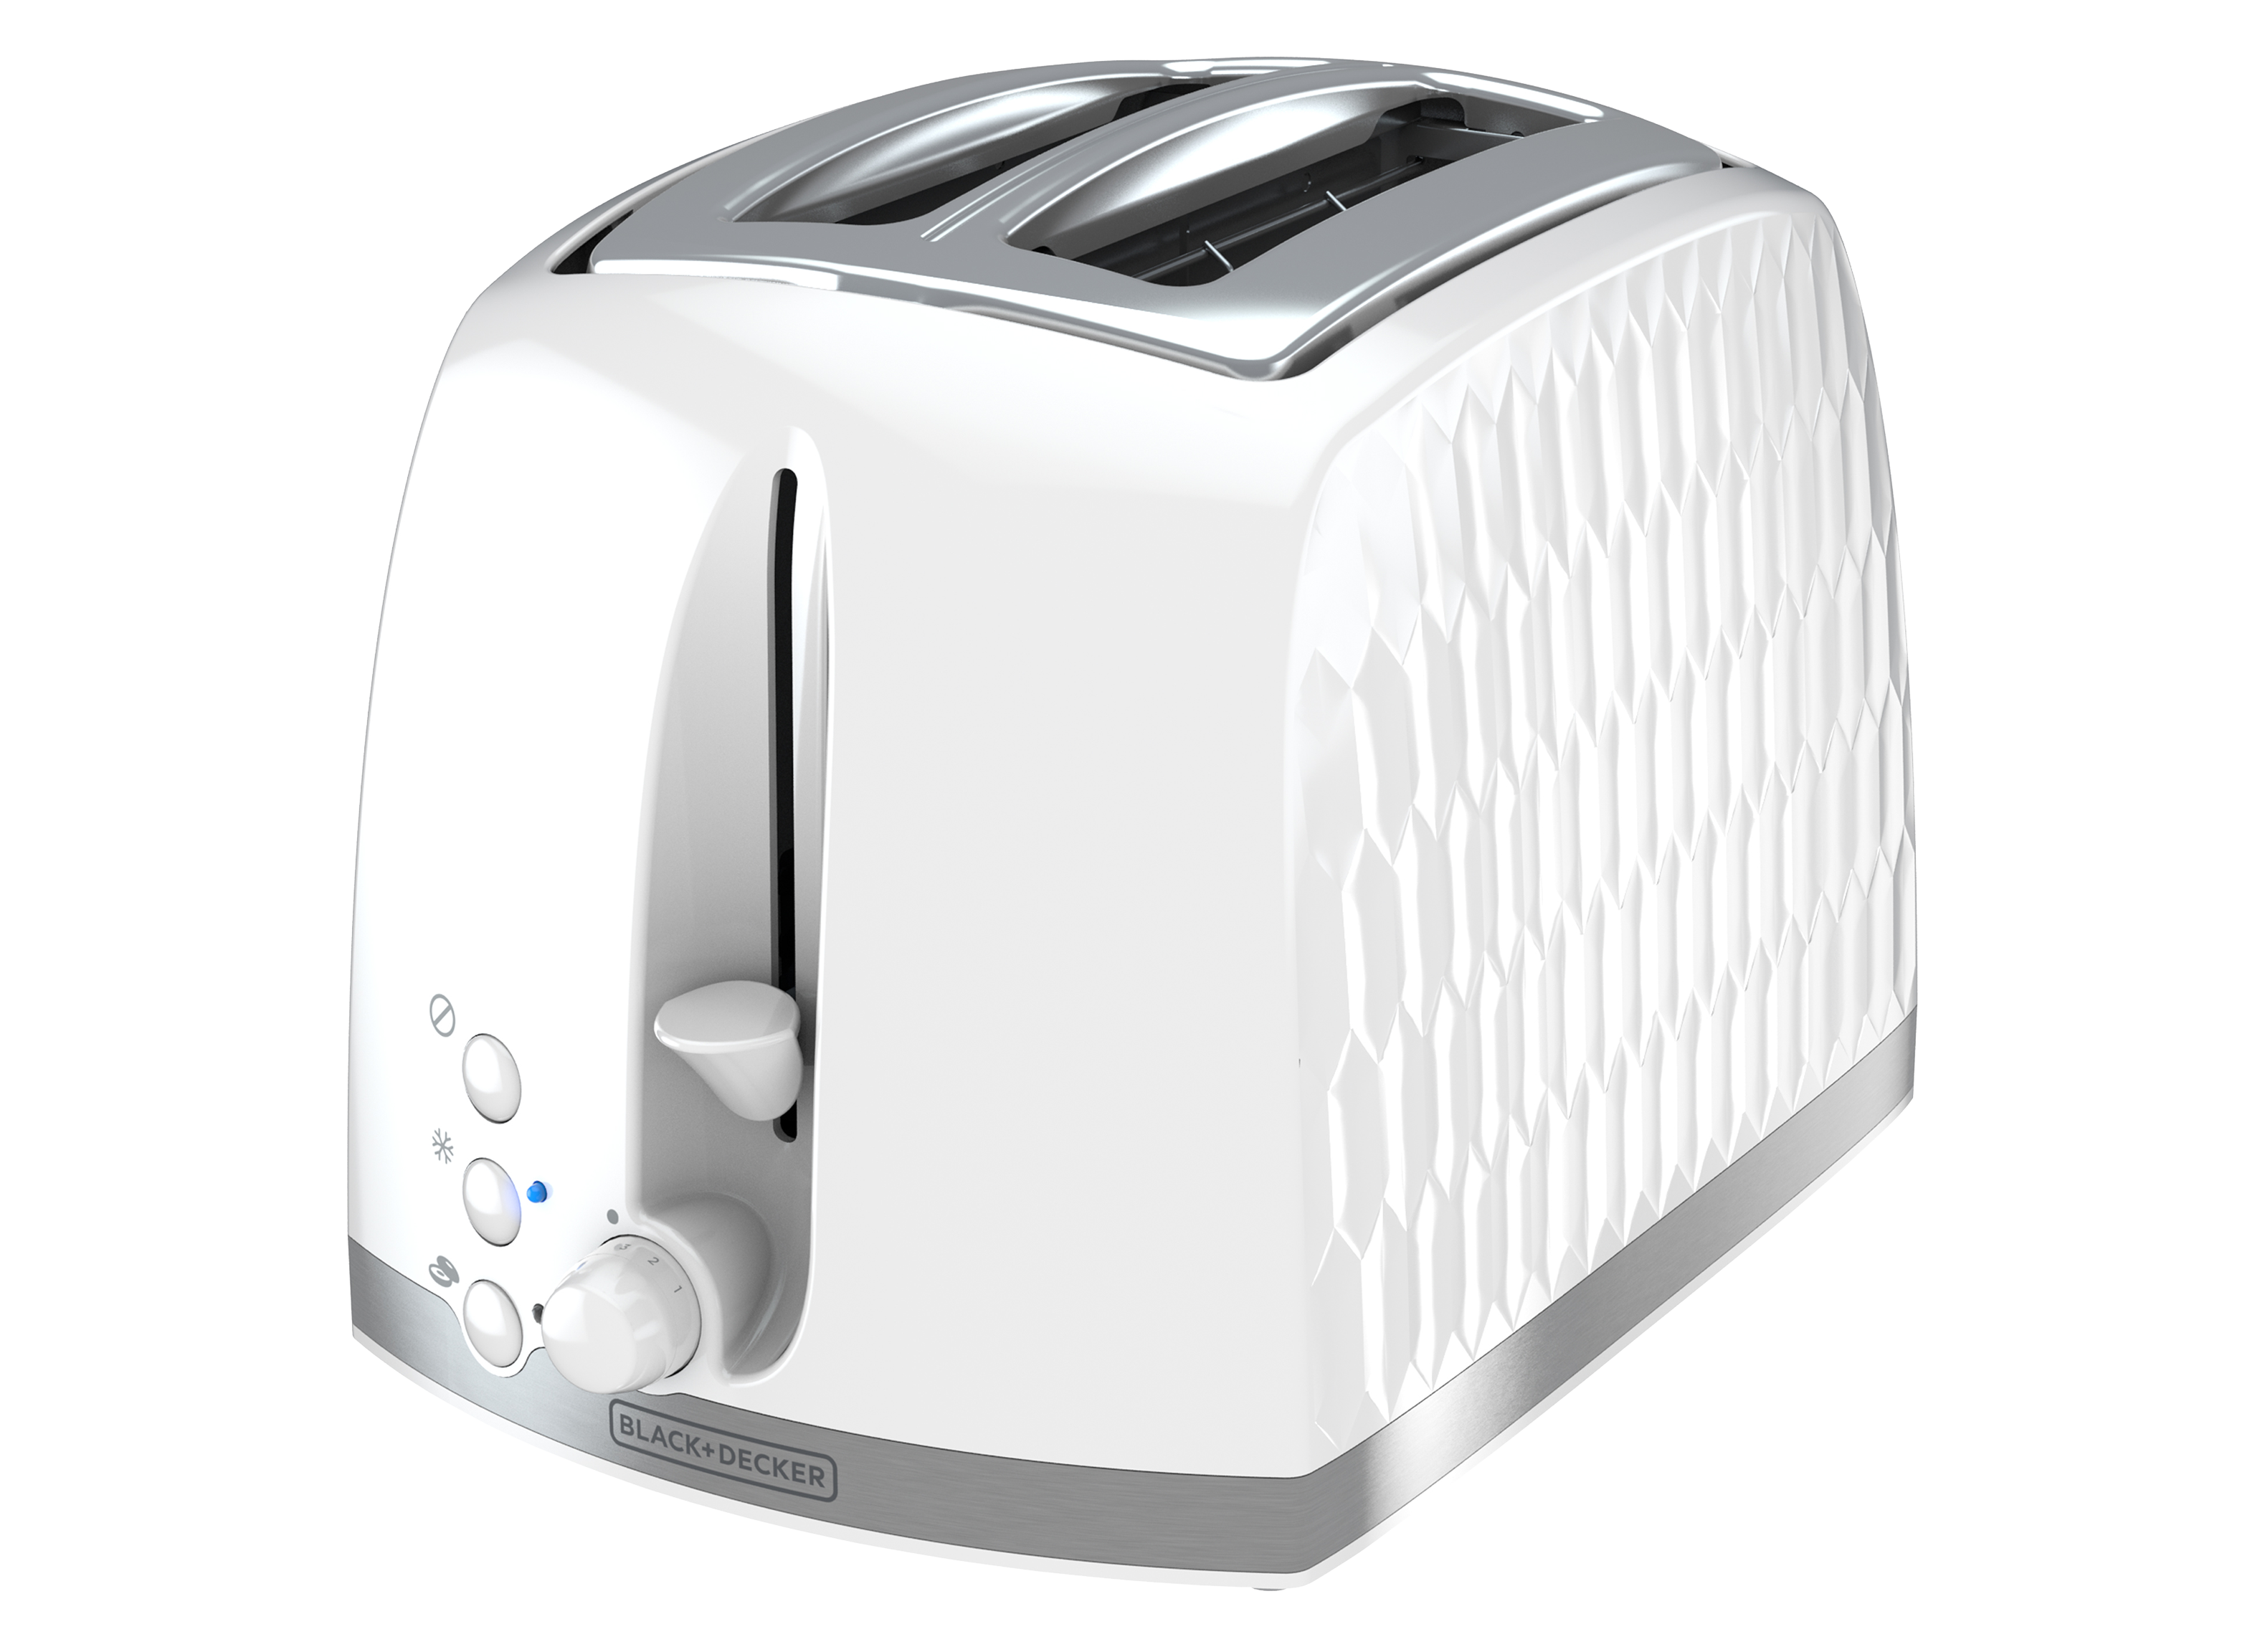 https://crdms.images.consumerreports.org/prod/products/cr/models/406539-2-slice-toasters-black-decker-honeycomb-collection-2-slice-toaster-10030464.png